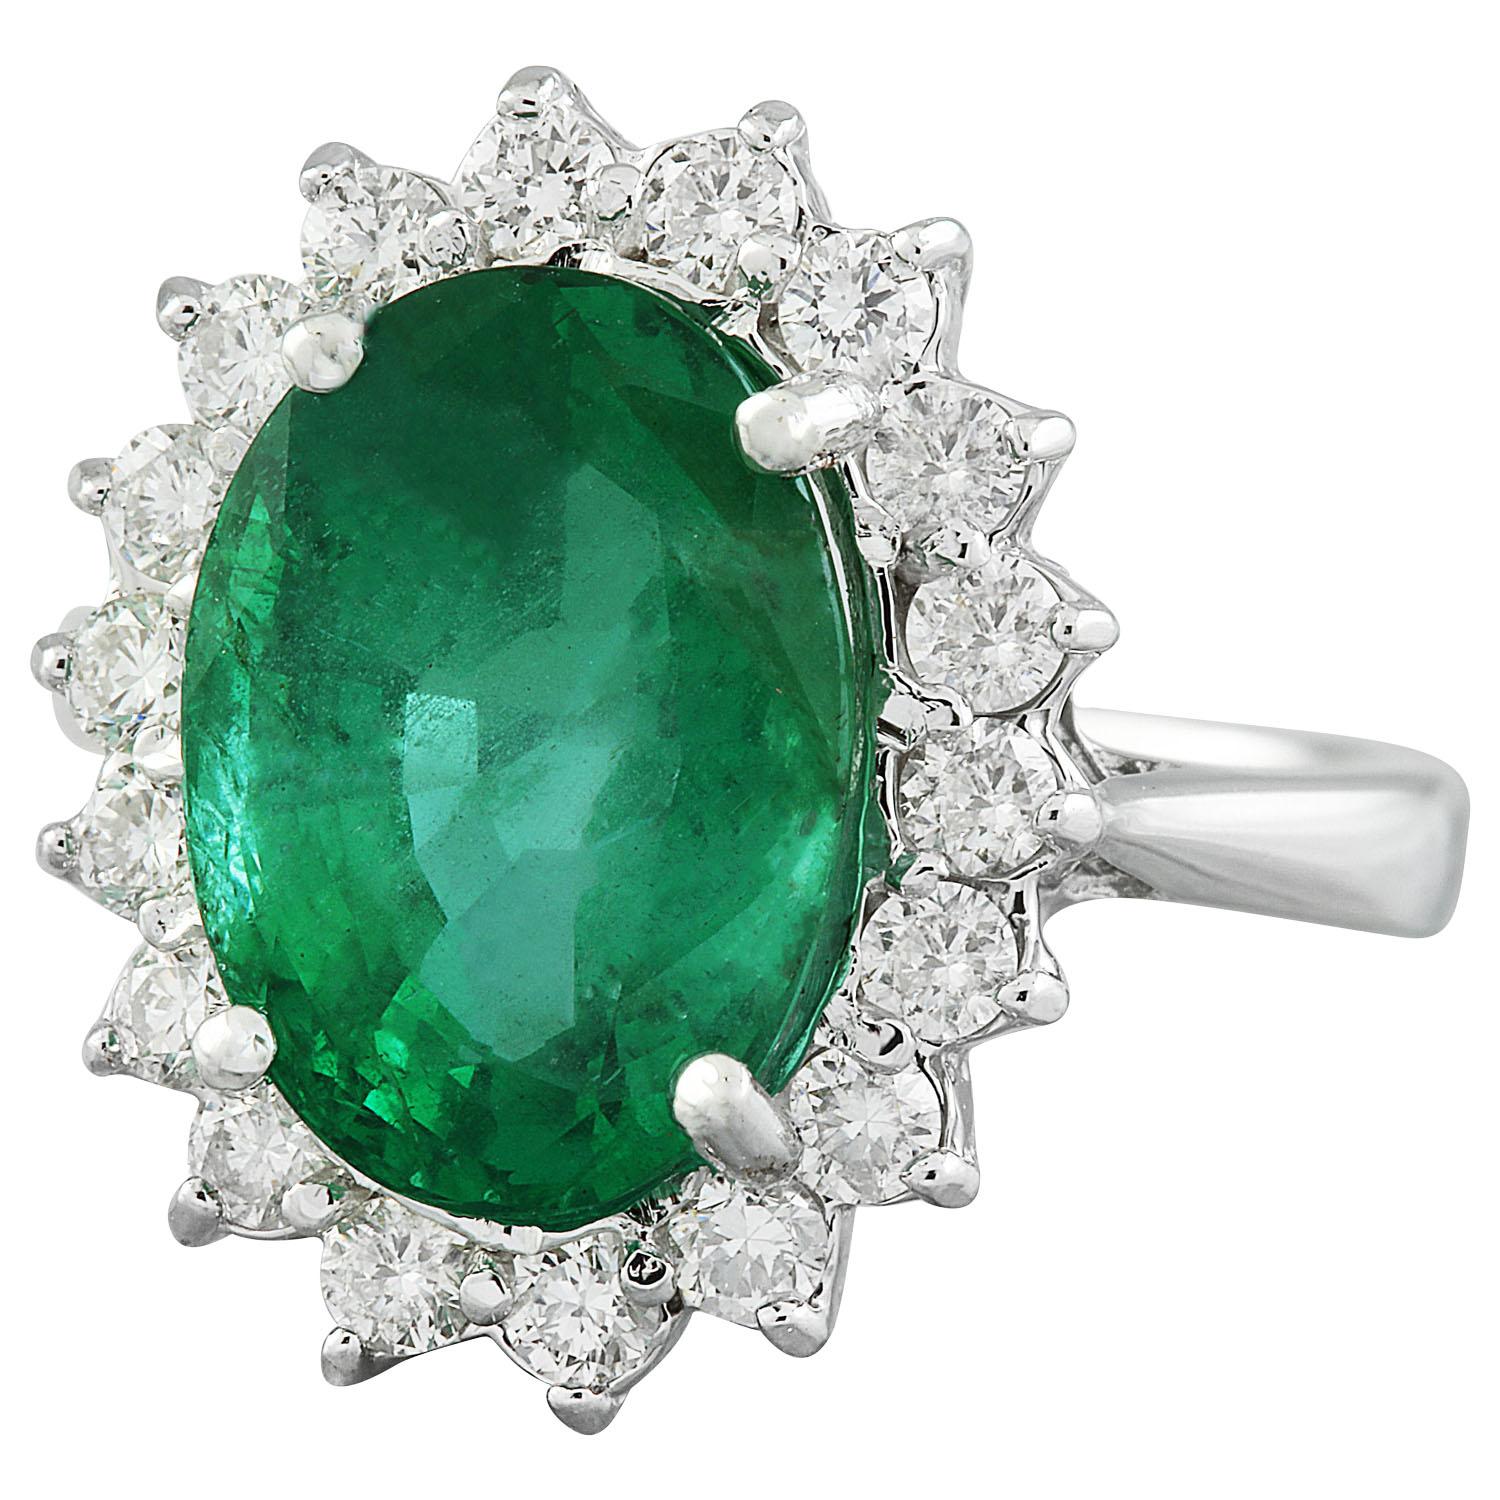 6.55 Carat Natural Emerald 14 Karat Solid White Gold Diamond Ring
Stamped: 14K 
Total Ring Weight: 5.3 Grams
Emerald Weight 5.55 Carat (12.00x10.00 Millimeters)
Diamond Weight: 1.00 carat (F-G Color, VS2-SI1 Clarity )
Face Measures: 18.30x14.95